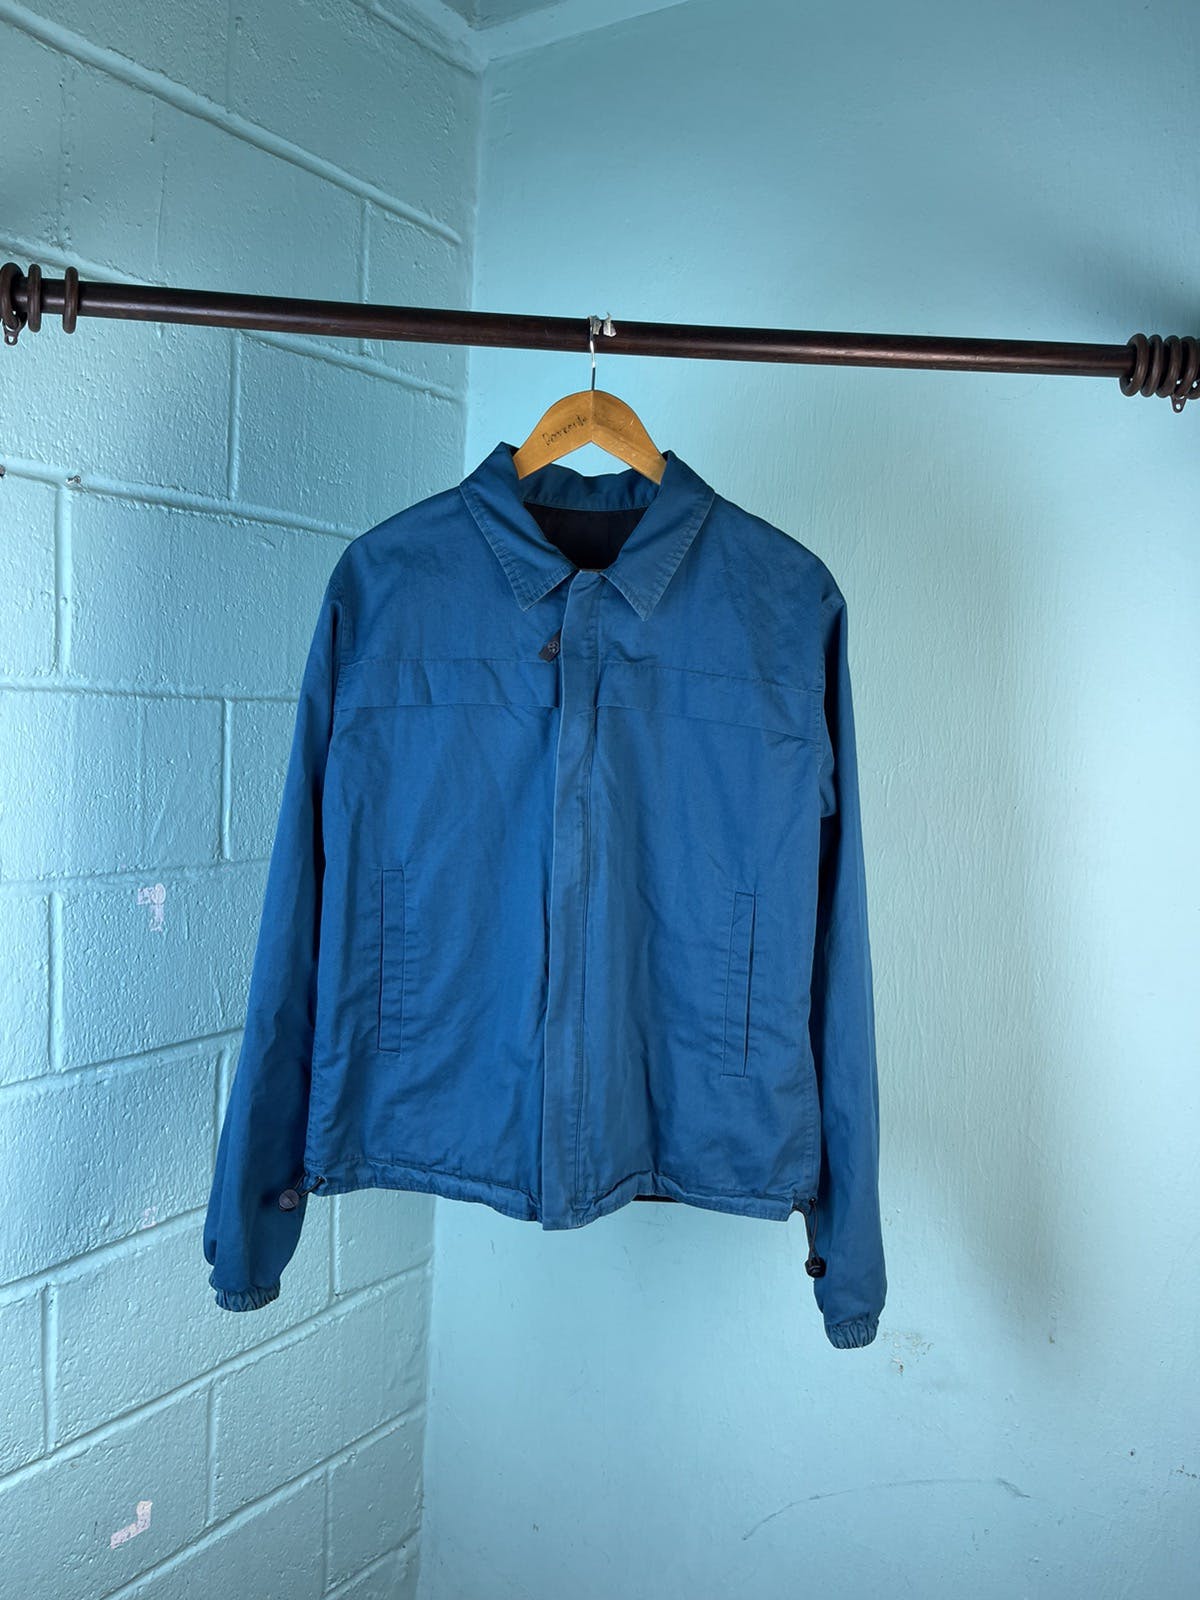 Christopher Lemaire Riversible Jacket - 7